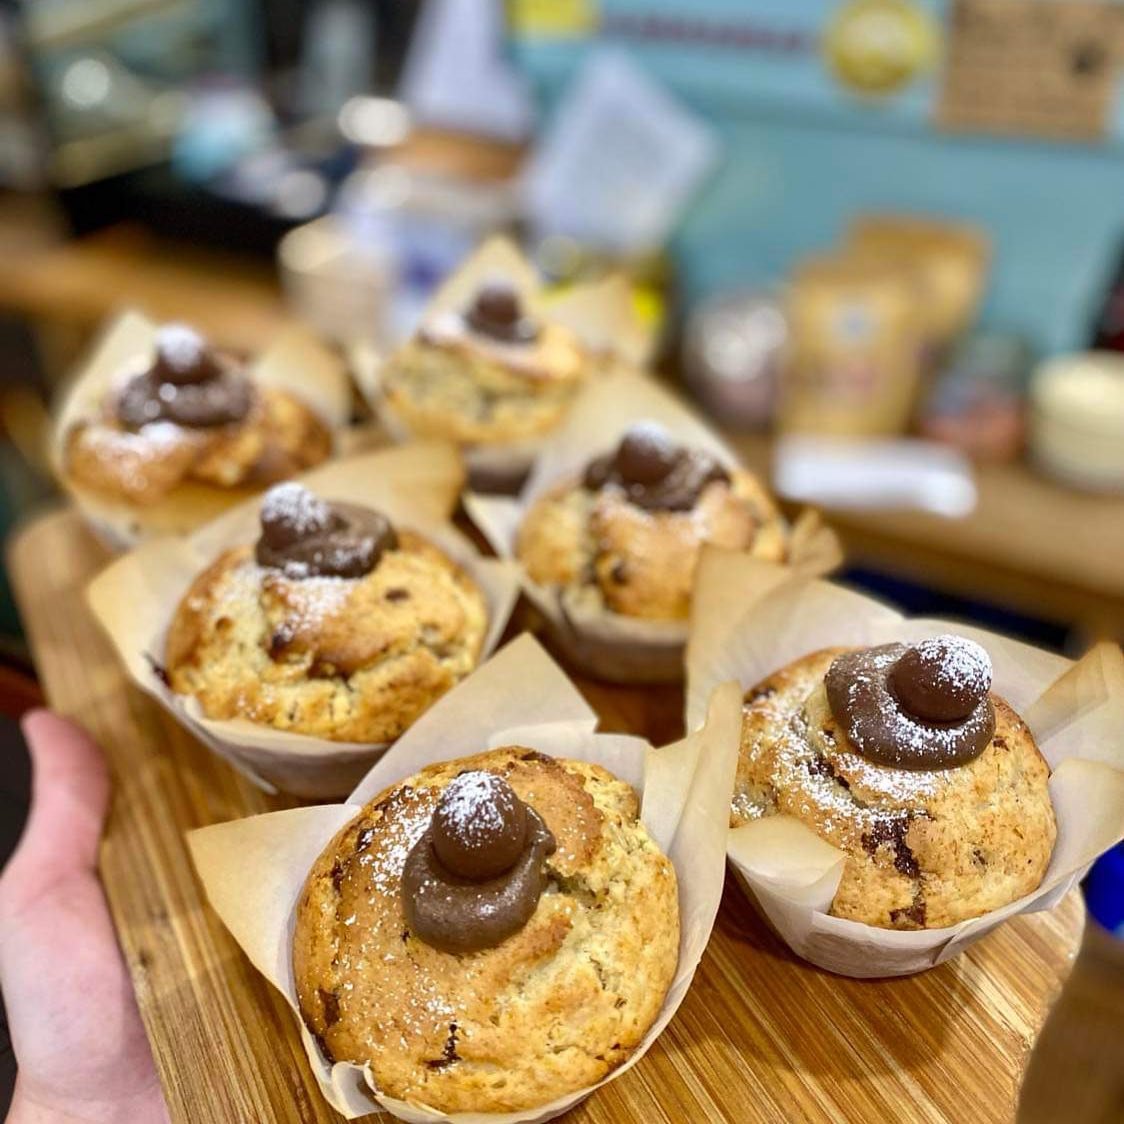 Muffin Monday is here!! today you can enjoy some delicious 𝗗𝗢𝗨𝗕𝗟𝗘 𝗖𝗛𝗢𝗖 𝗕𝗔𝗡𝗔𝗡𝗔 𝗠𝗨𝗙𝗙𝗜𝗡𝗦 🤯🤯

Muffins are available on our APP/WEBSITE for takeaway pickup or for delivery using DOORDASH

🔗please click the link in our bio to orde